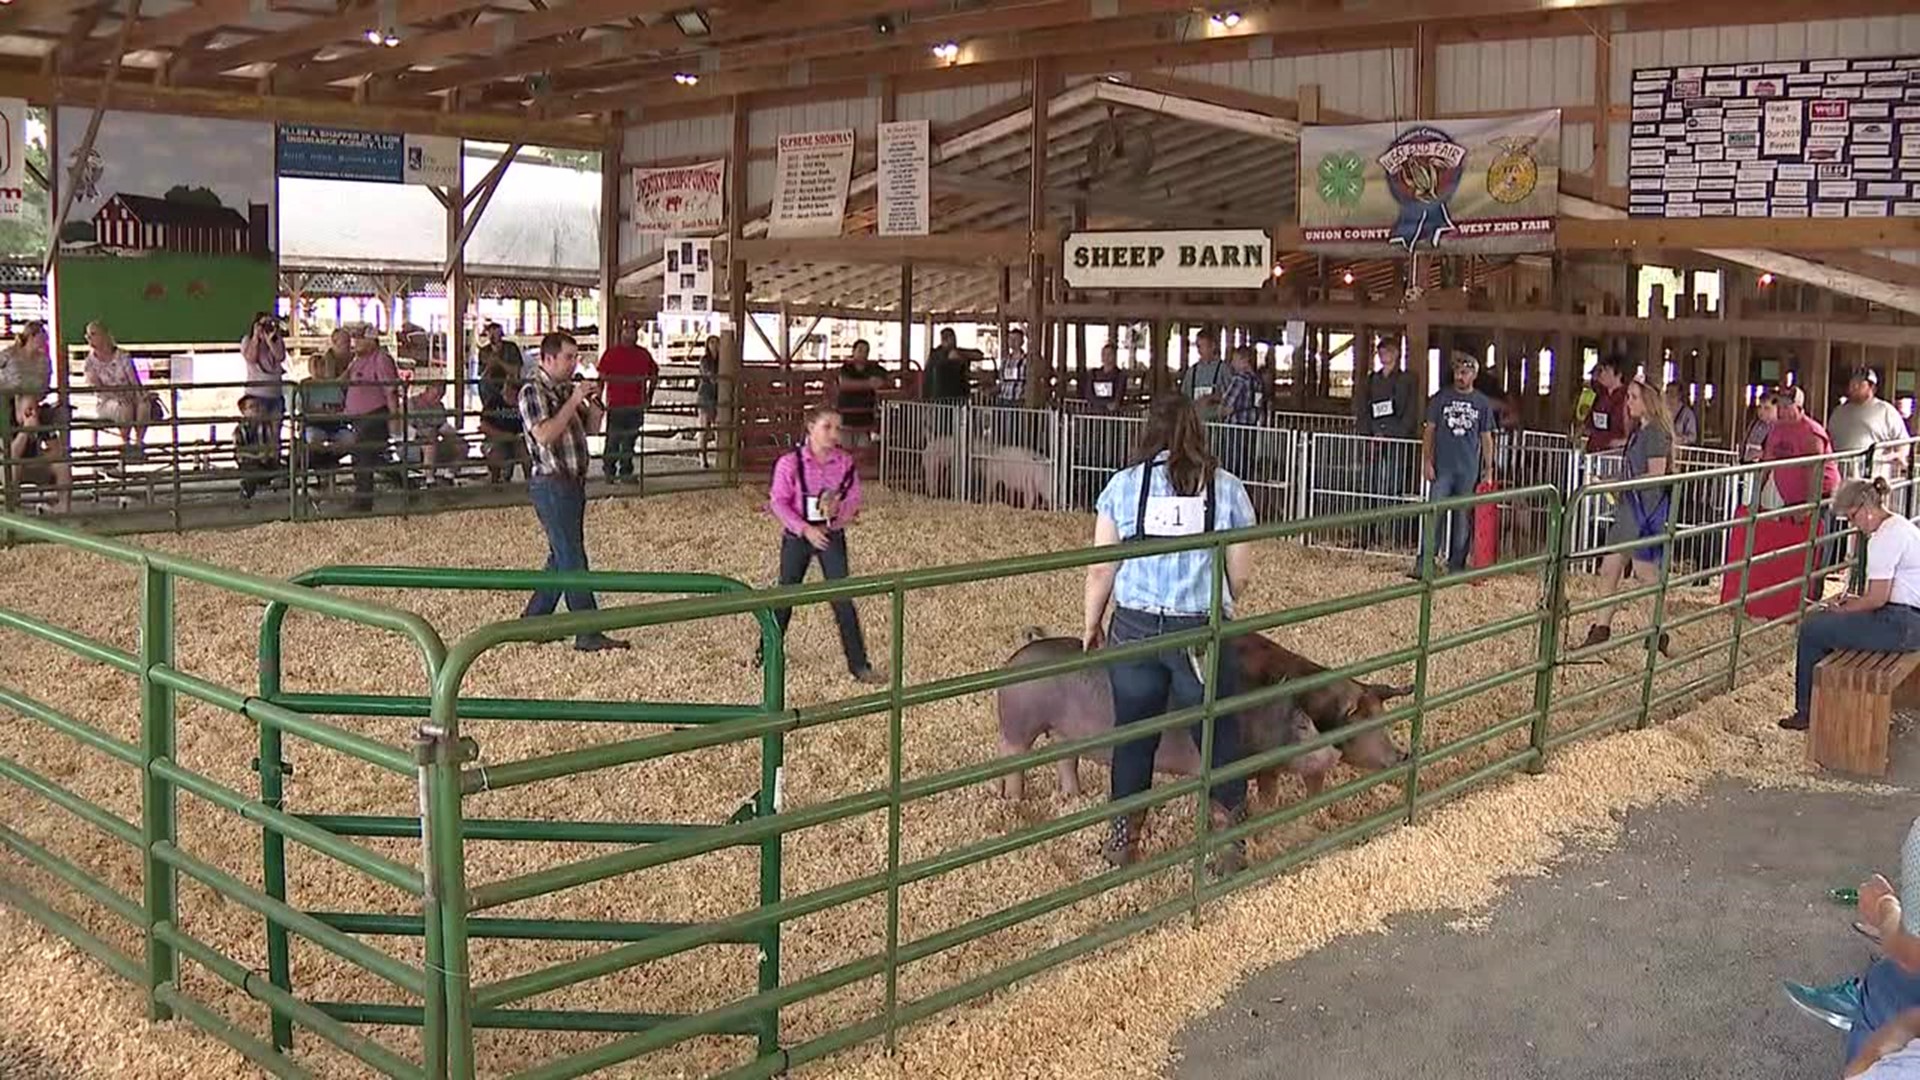 Union County West End Fair in full swing